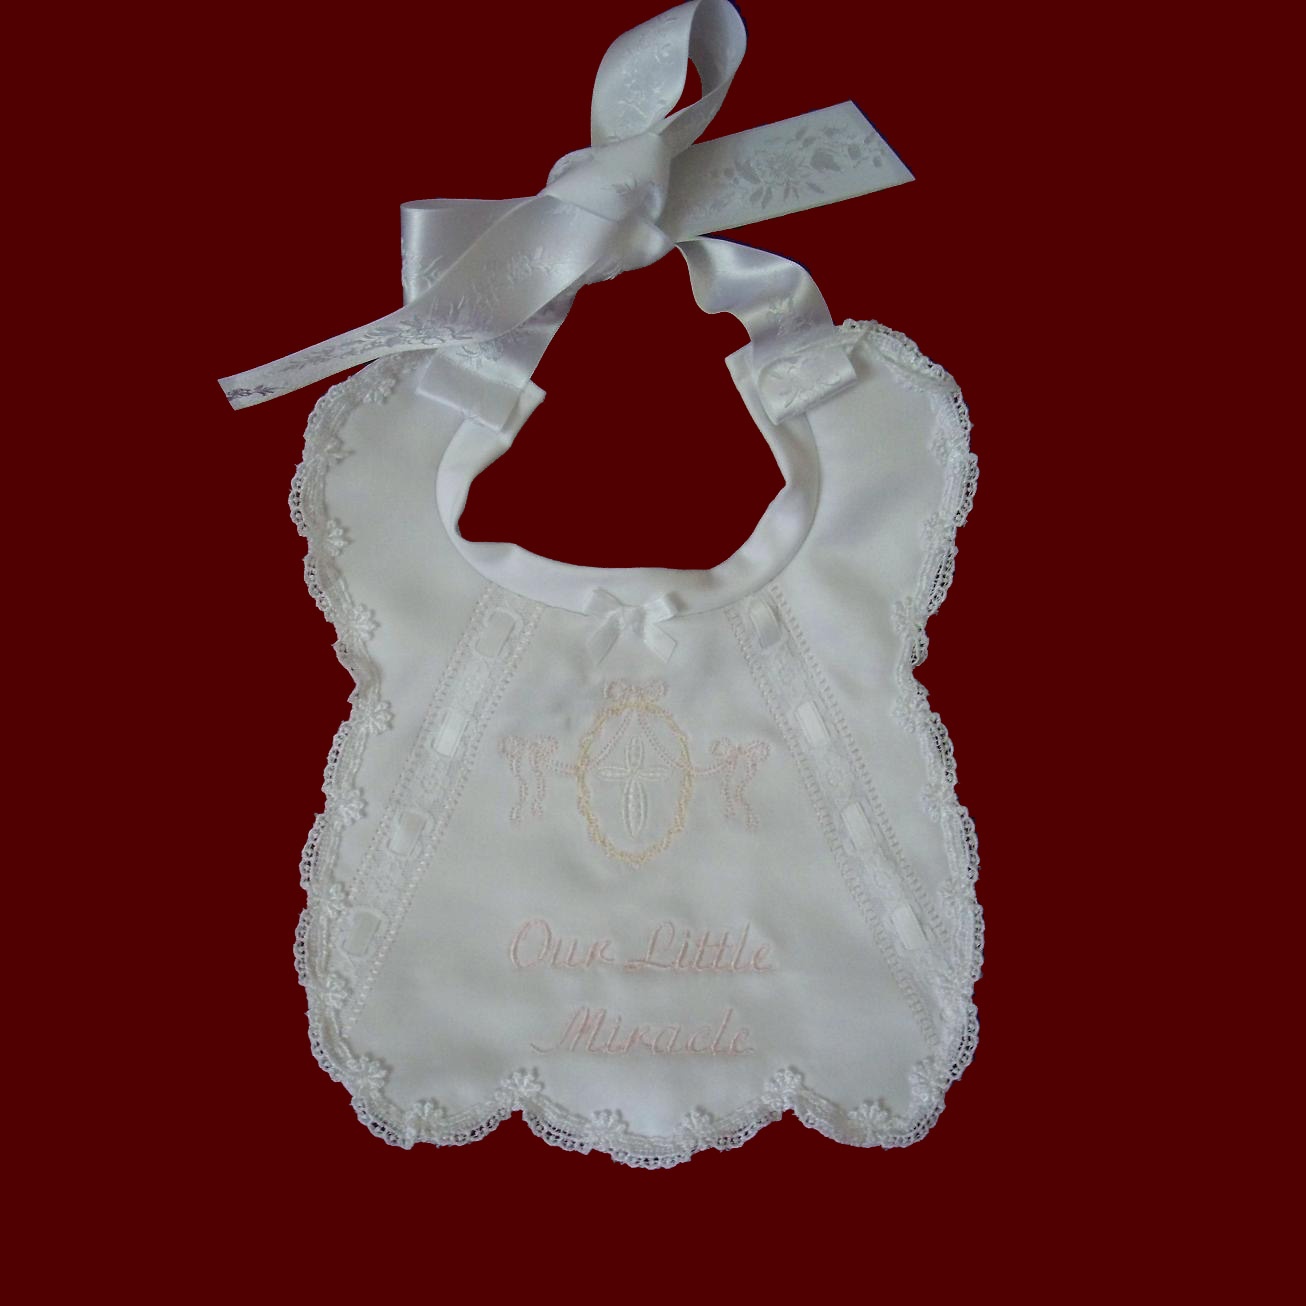 Our Little Miracle Christening Bib